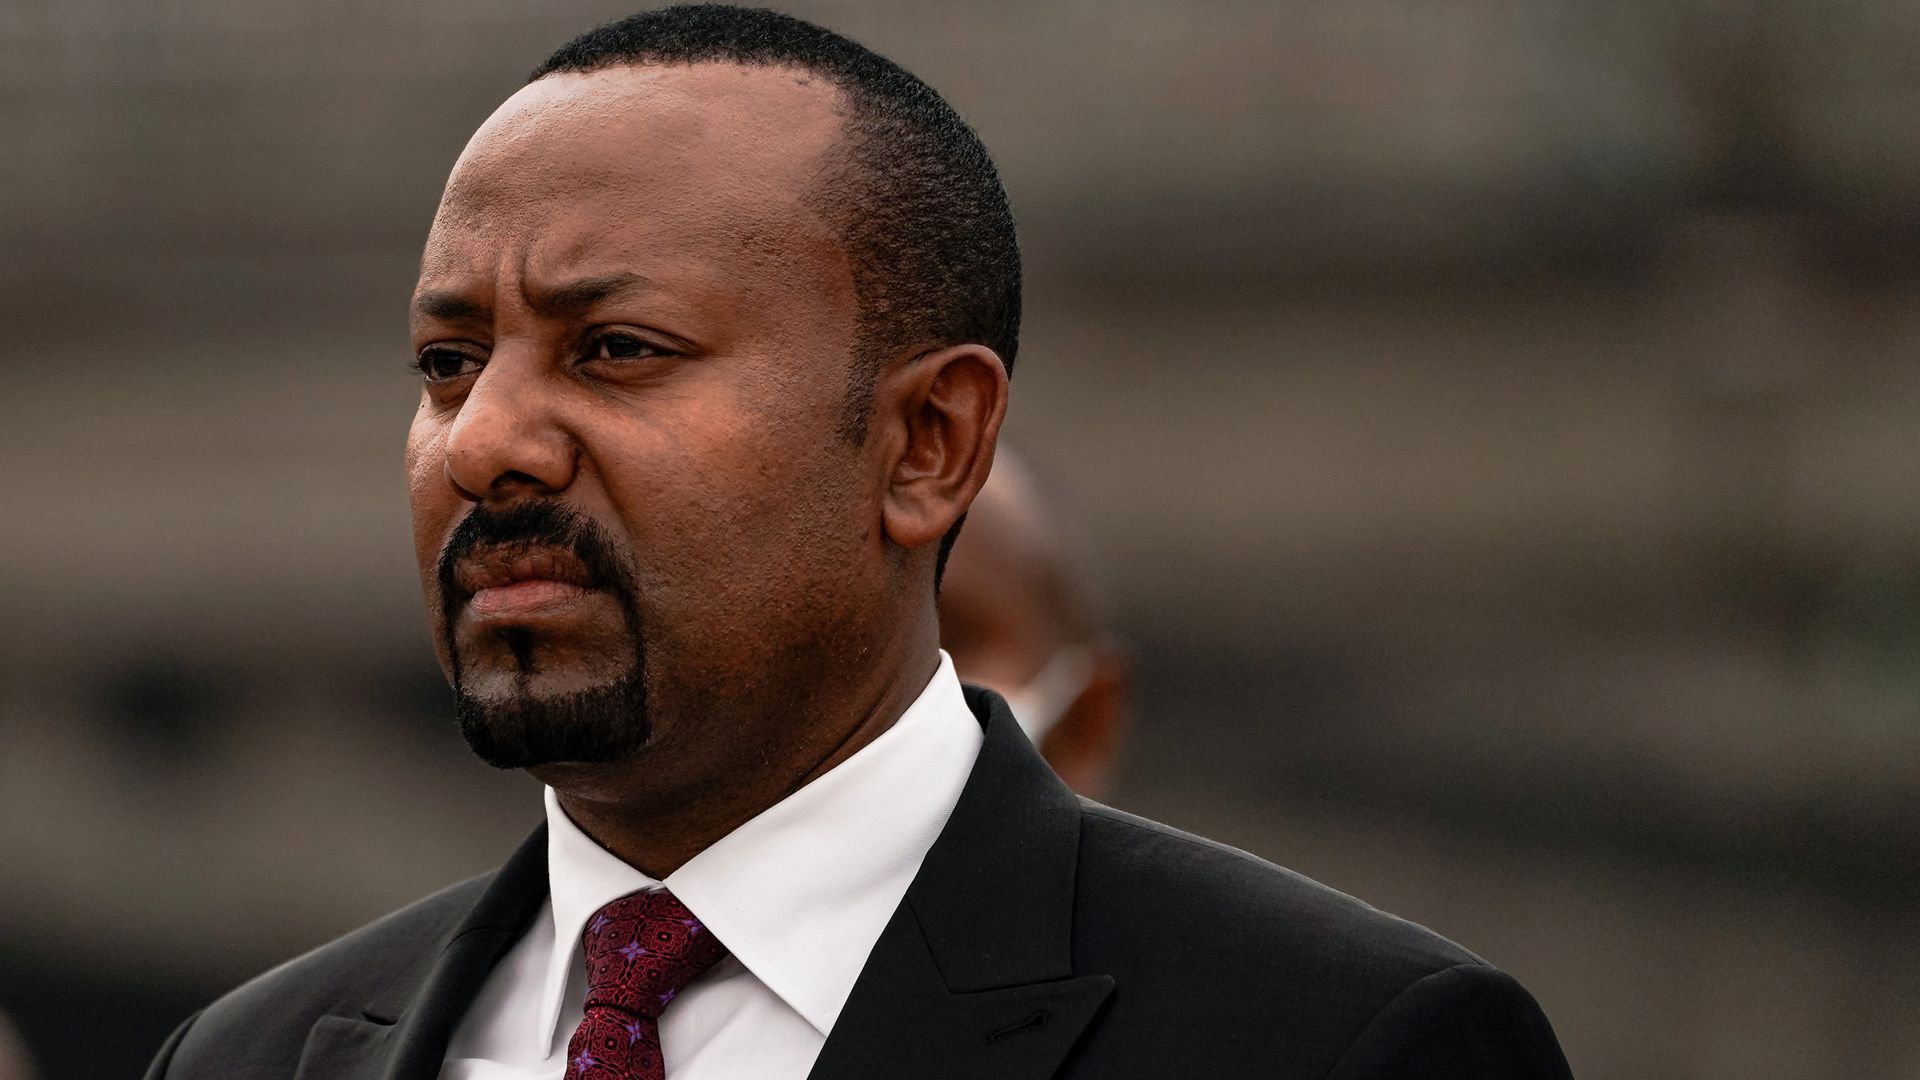 Ethiopia's Prime Minister  Abiy Ahmed in Addis Ababa in June 2021.